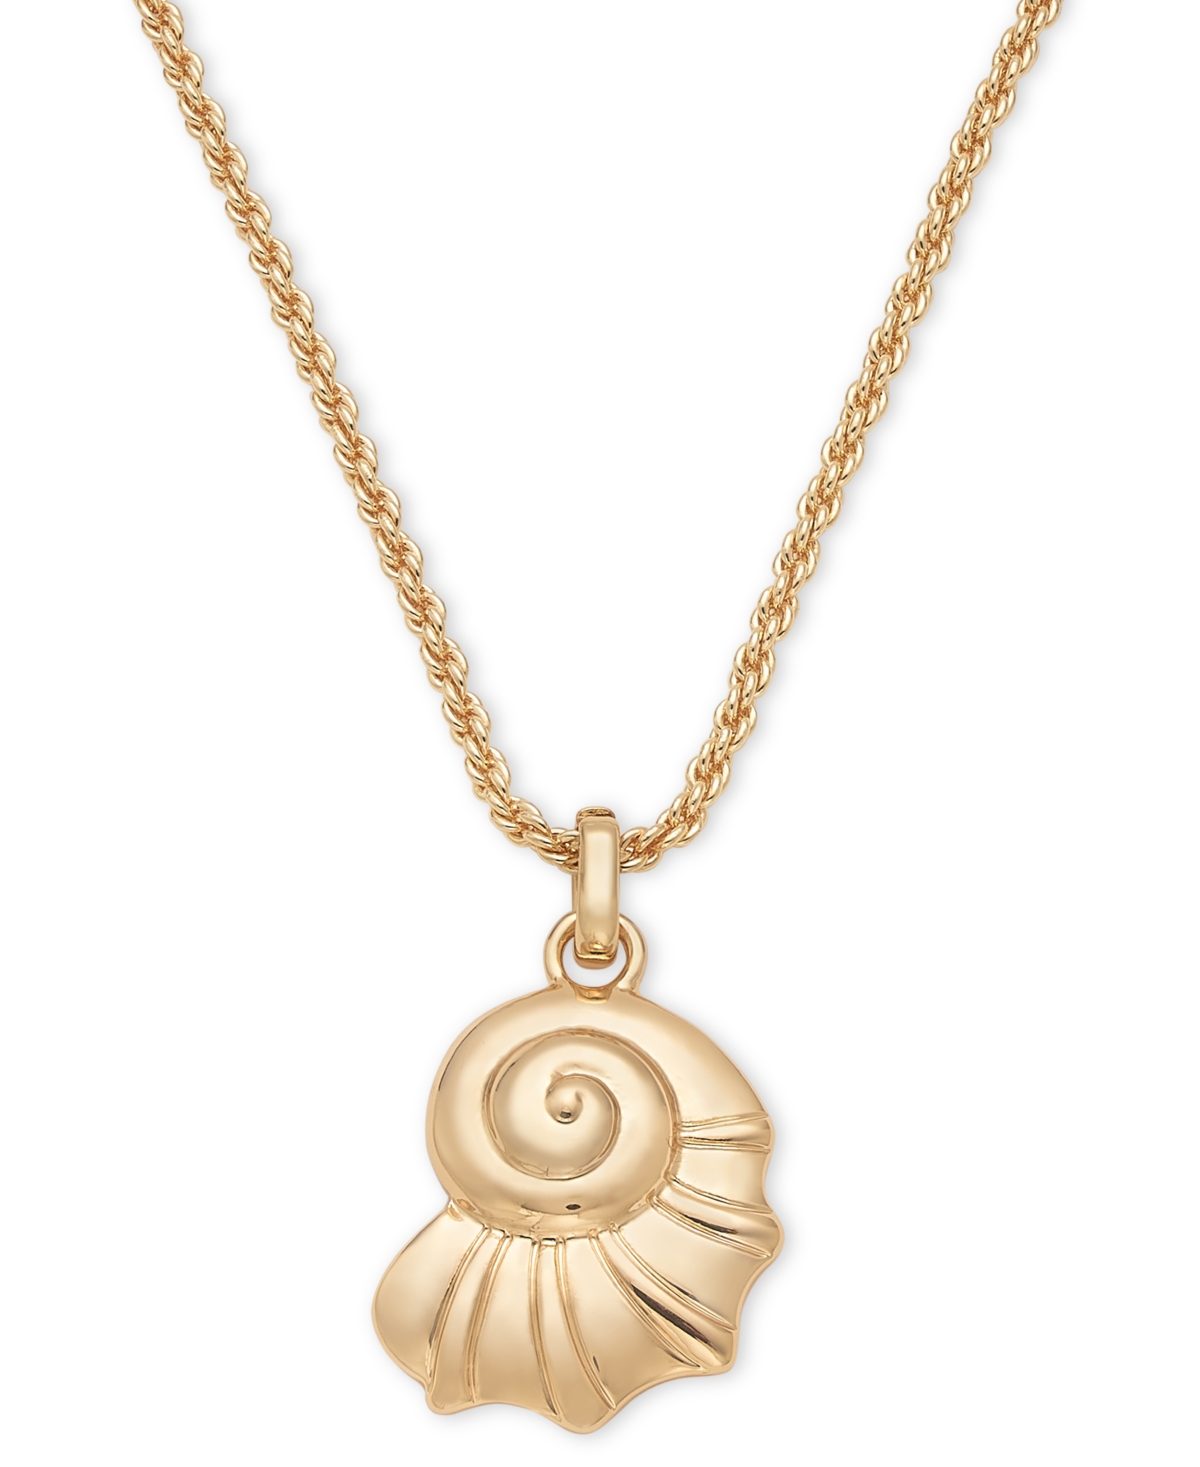 Gold-Tone Seashell Pendant Necklace, 38" + 2" extender, Created for Macy's - Gold